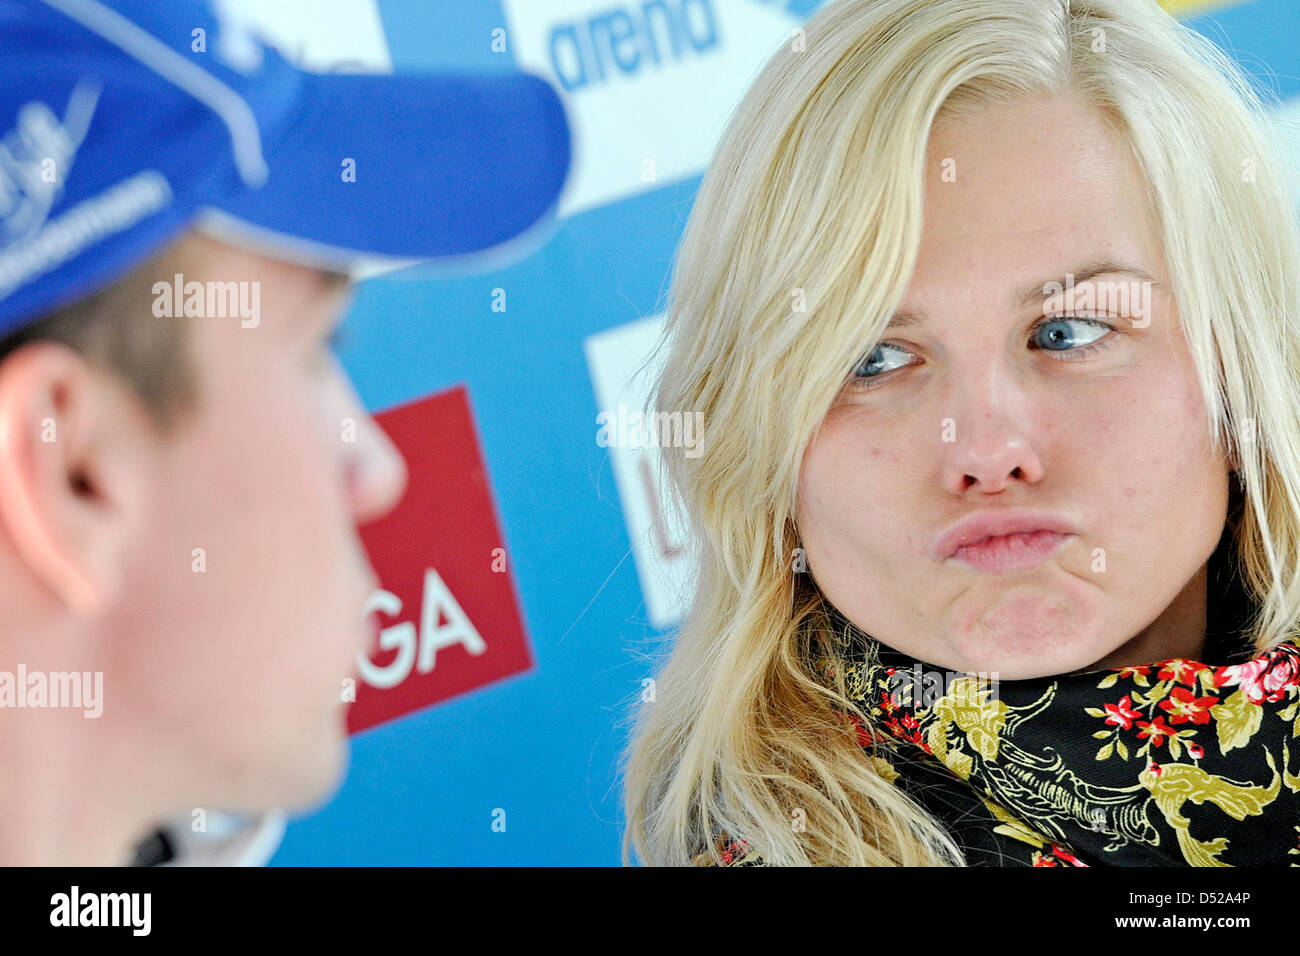 German swimming champions Britta Steffen (R) and Paul Biedermann (L) smile during a press conference on the FINA Short Course Swimming World Championships in Berlin, Germany, 29 October 2010. The Short Course World Champs are held on 30 and 31 November in Berlin. Photo: MARIUS BECKER Stock Photo